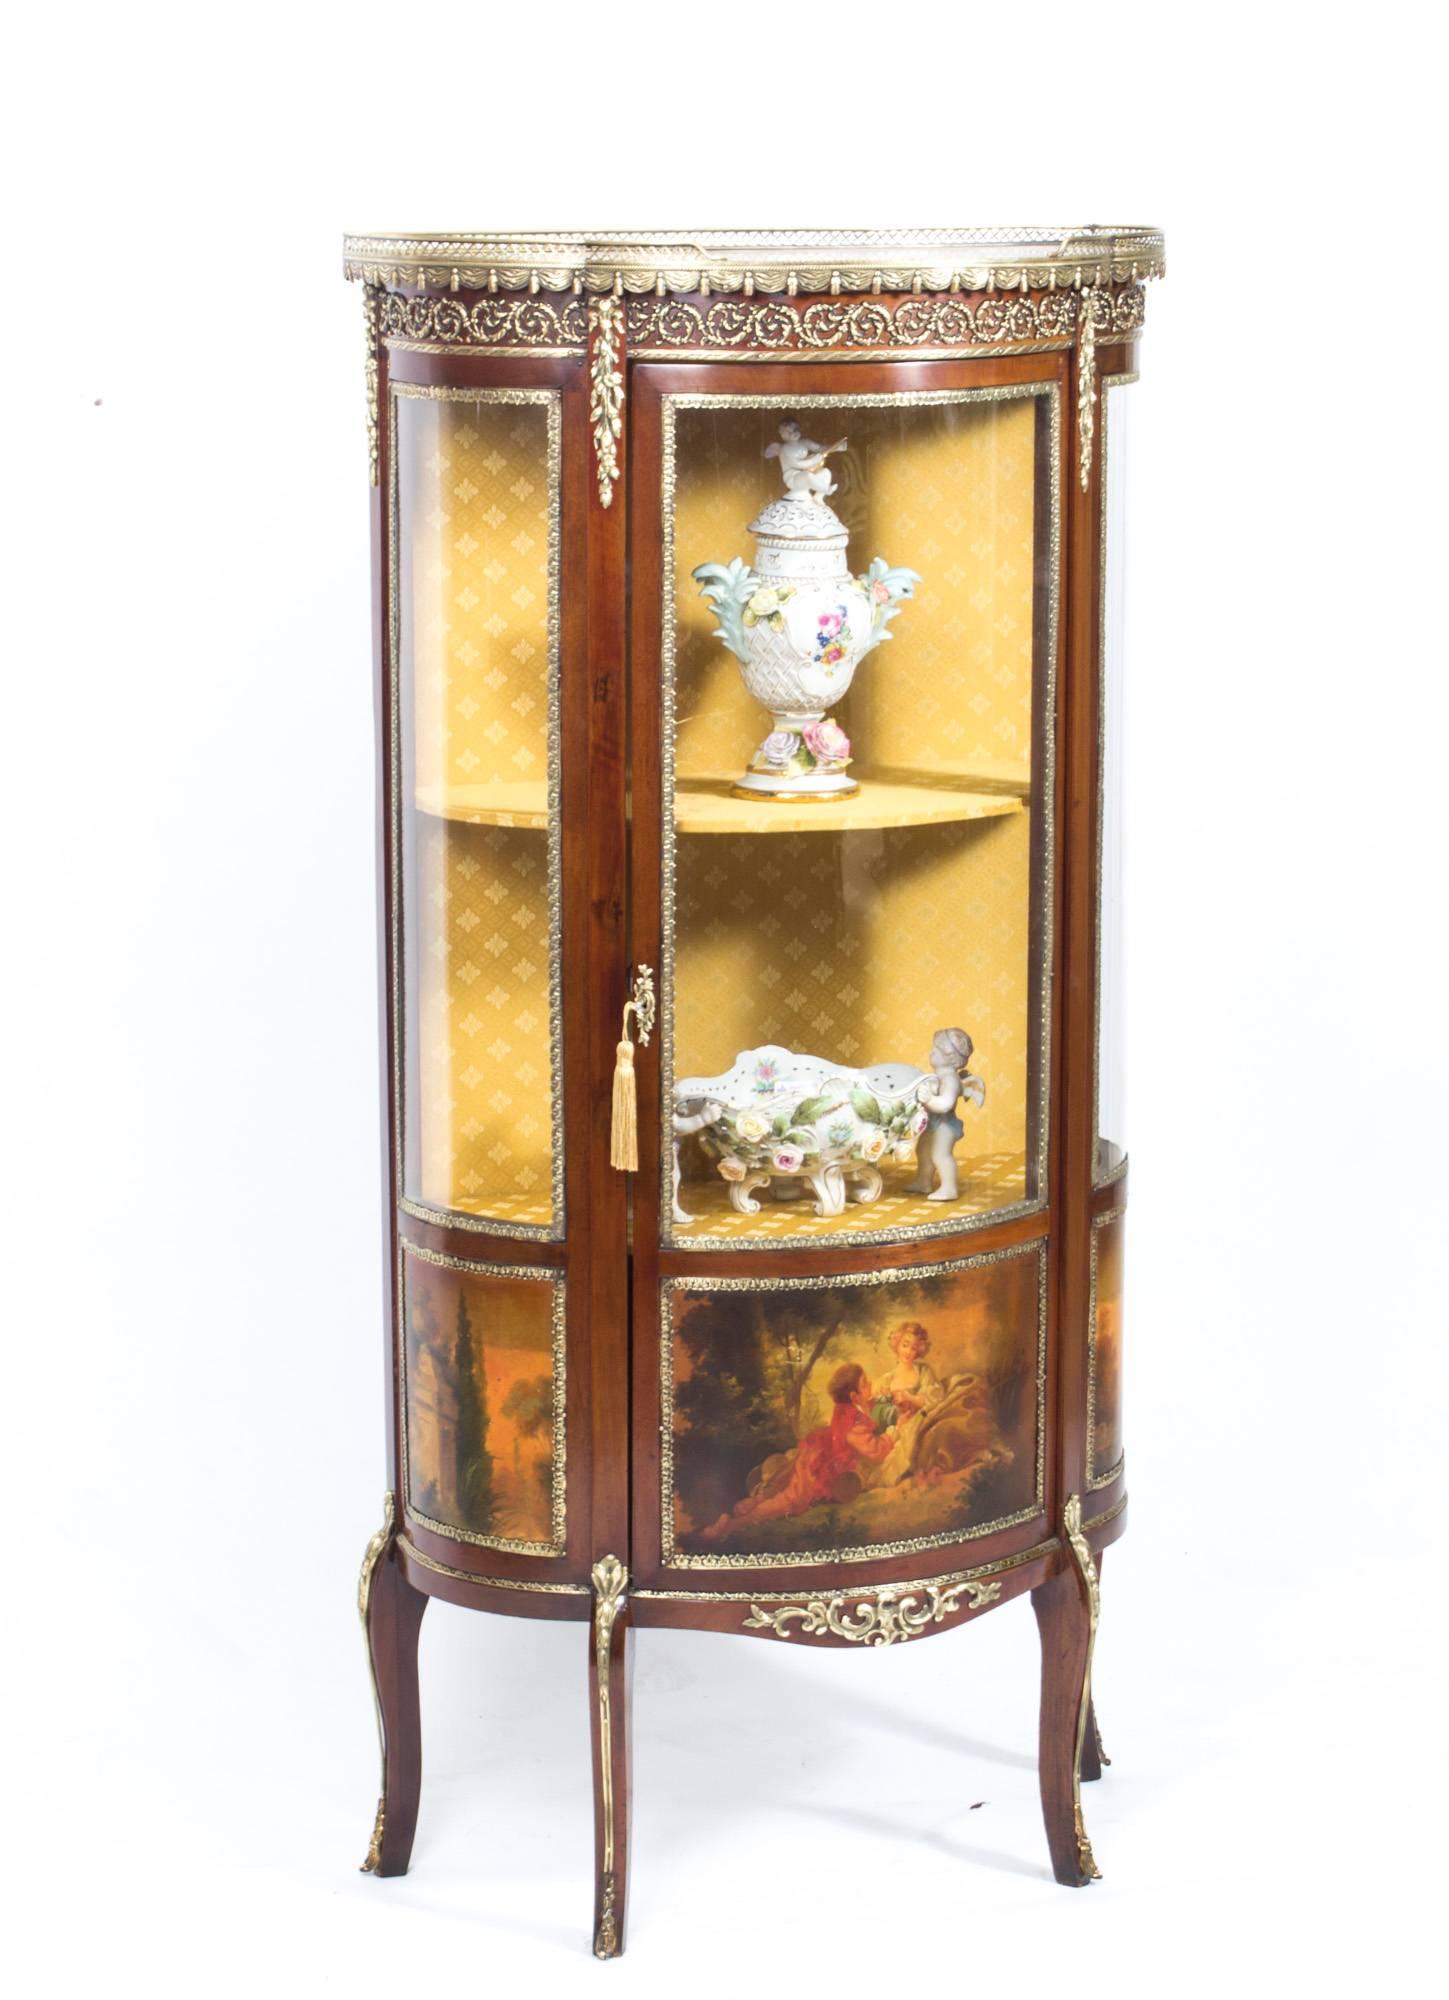 This is a stunning antique French Vernis Martin display cabinet in the Louis XV manner, circa 1900 in date.

It has exquisite hand-painted decoration, is further decorated with exquisite ormolu mounts and has an inset marble top with an attractive